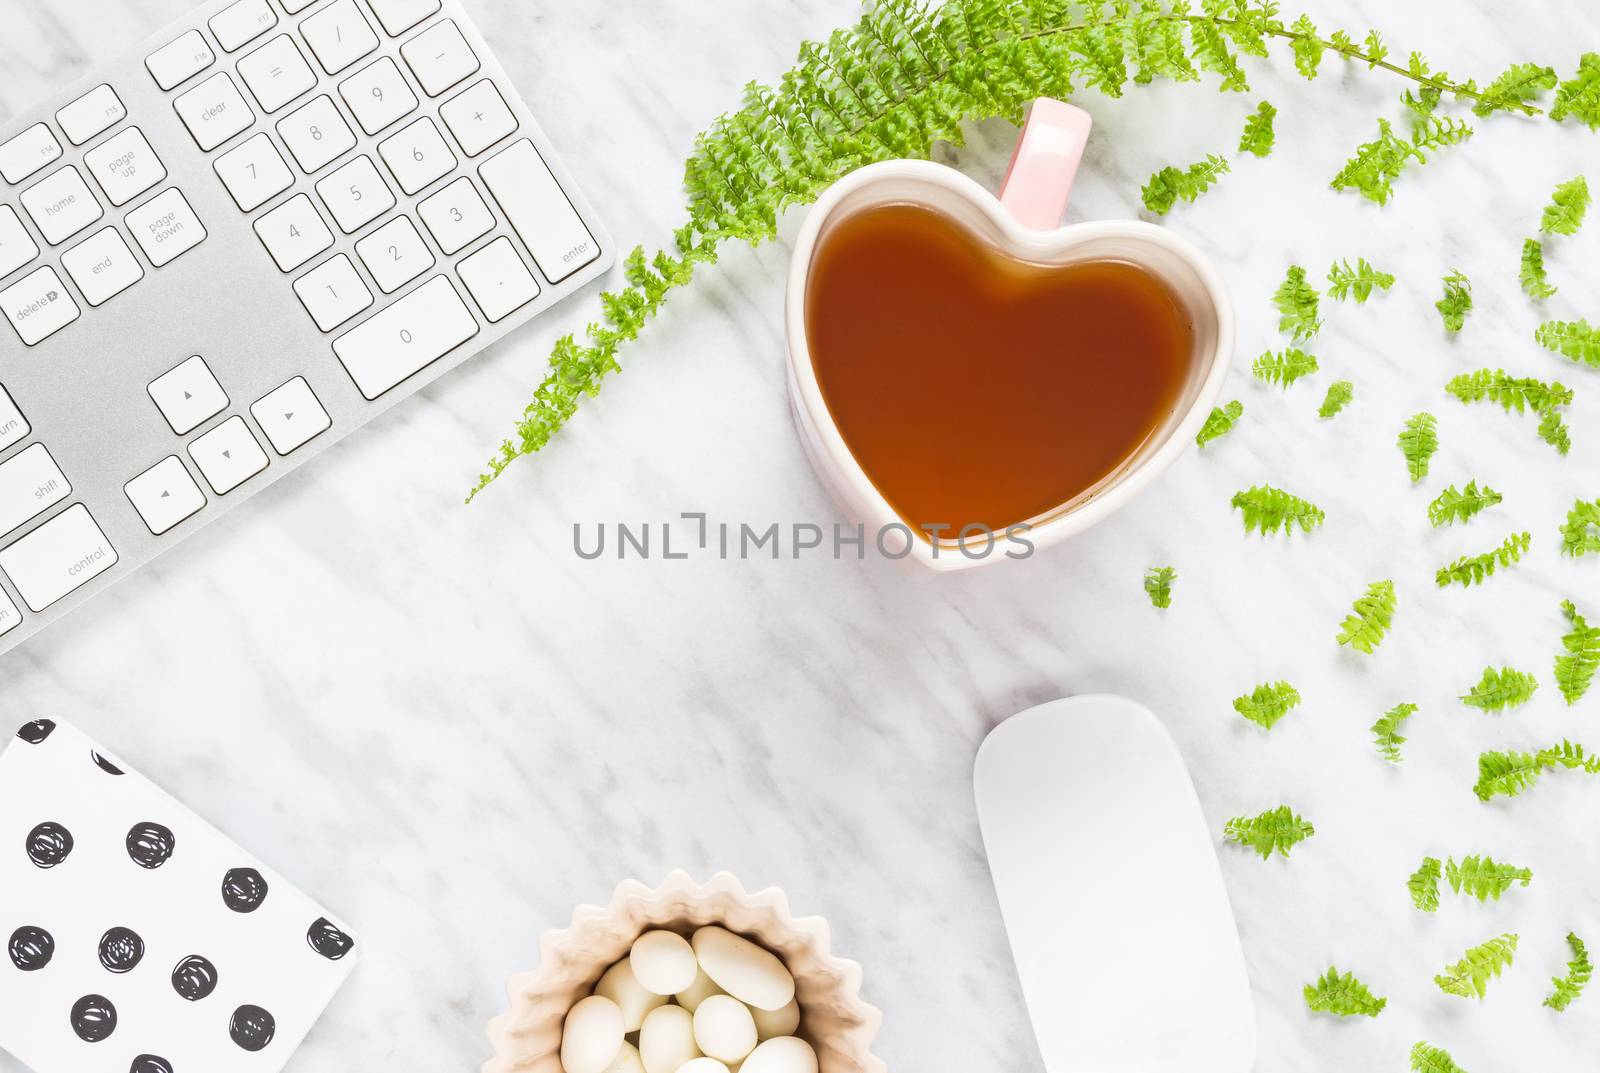 Beautiful home office workspace with heart-shaped teacup by anikasalsera